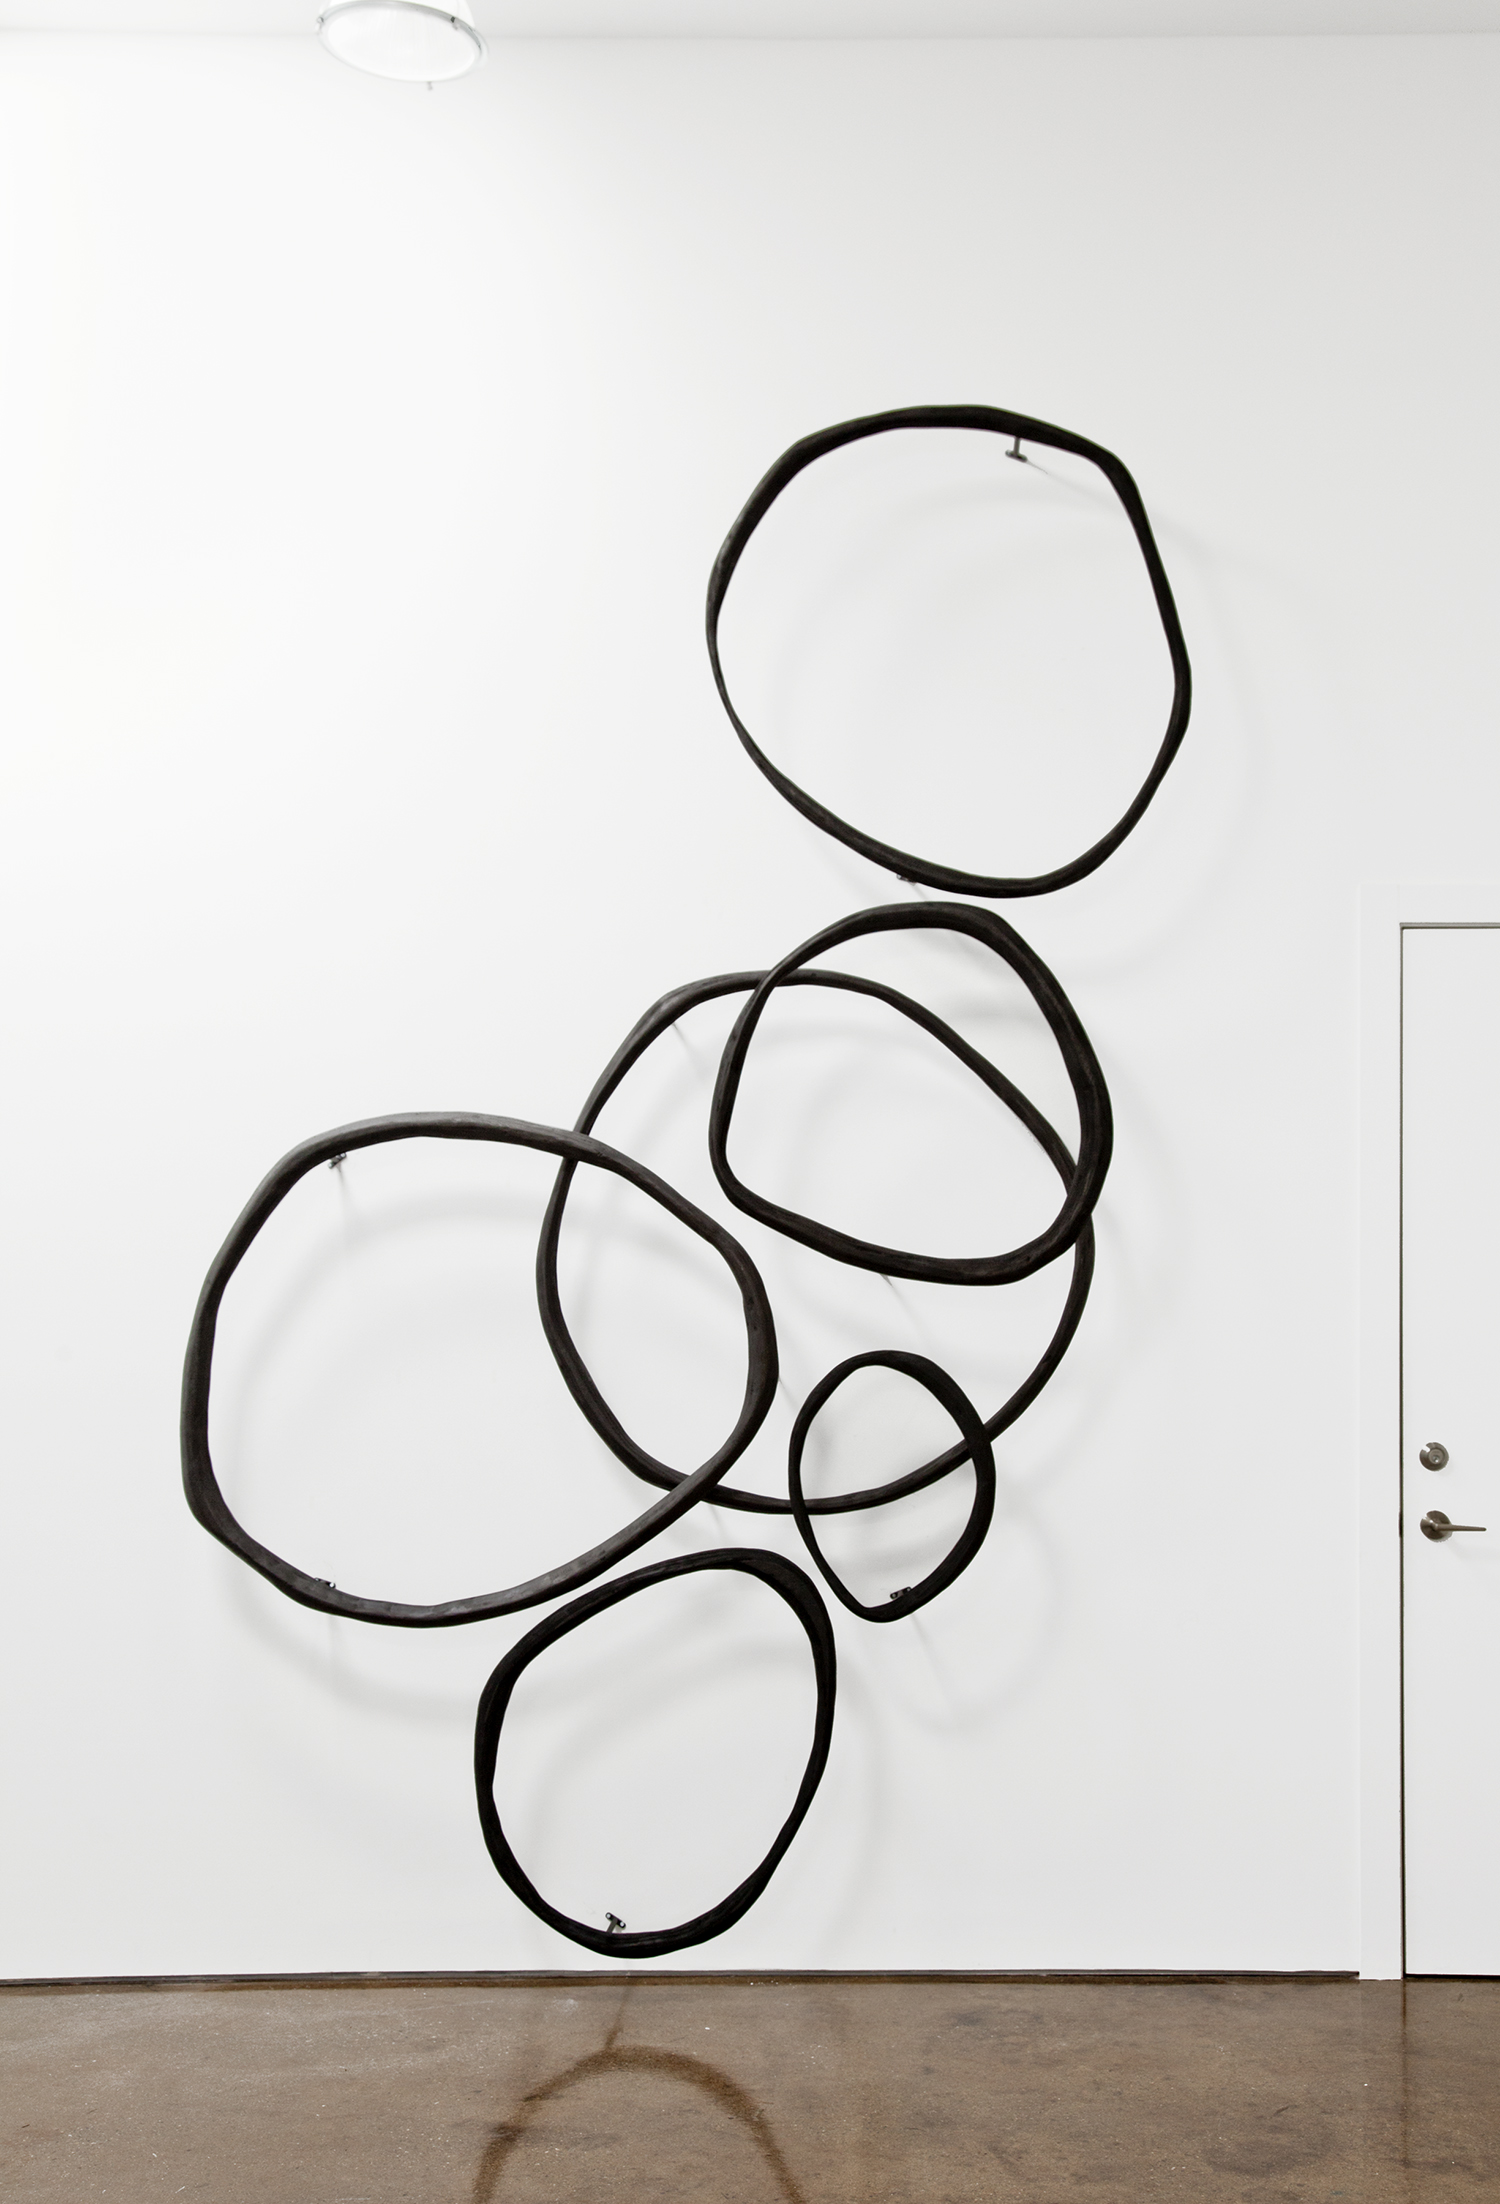   rings  2018 wood, ink 144 x 84 x 10.5 inches 